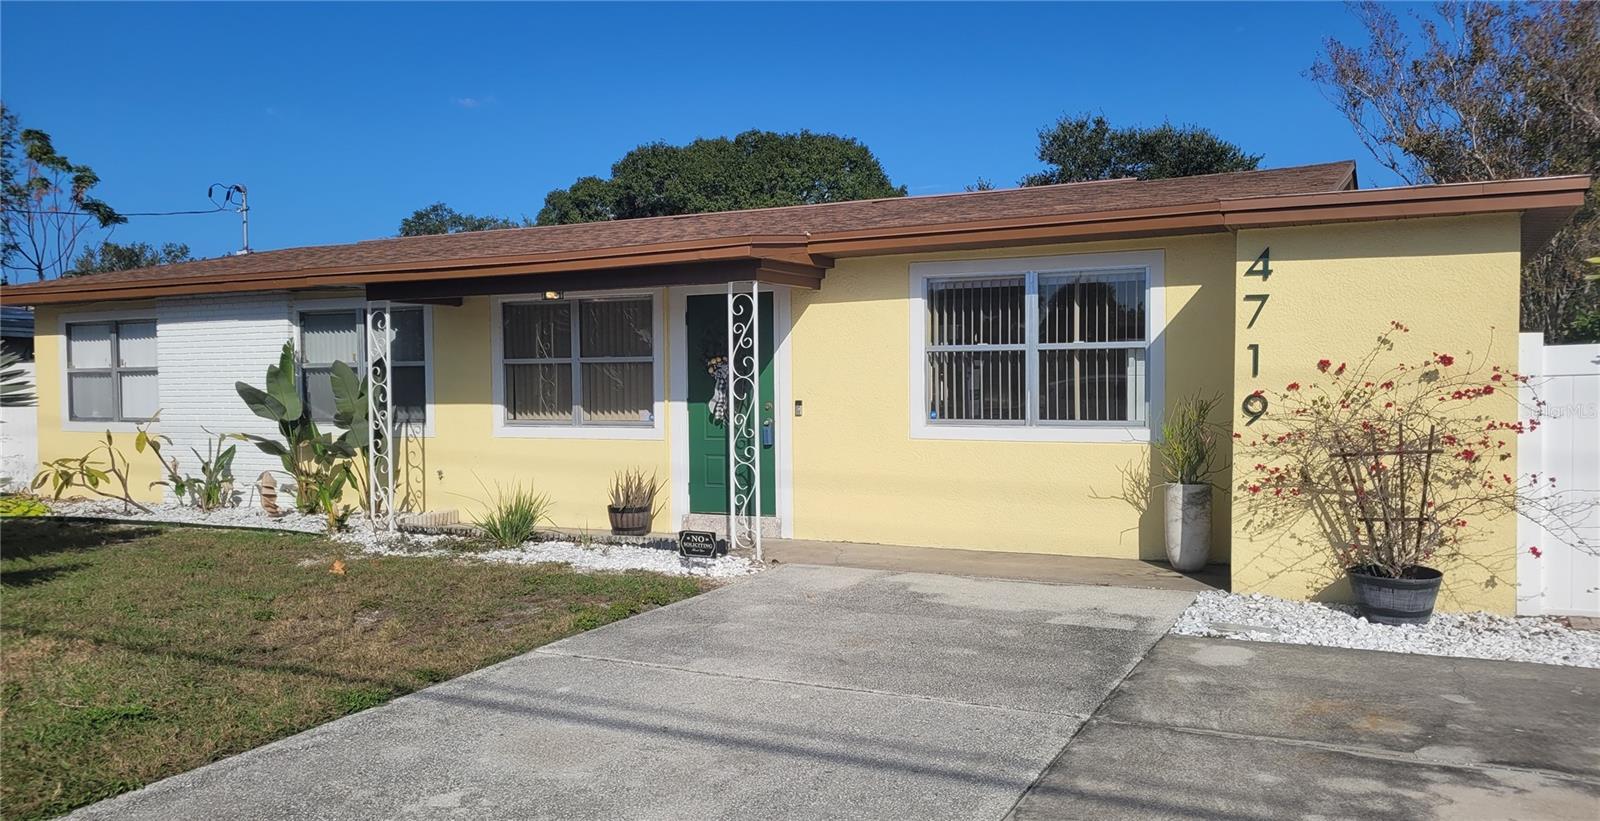 Photo one of 4719 W Montgomery Ave Tampa FL 33616 | MLS T3486768